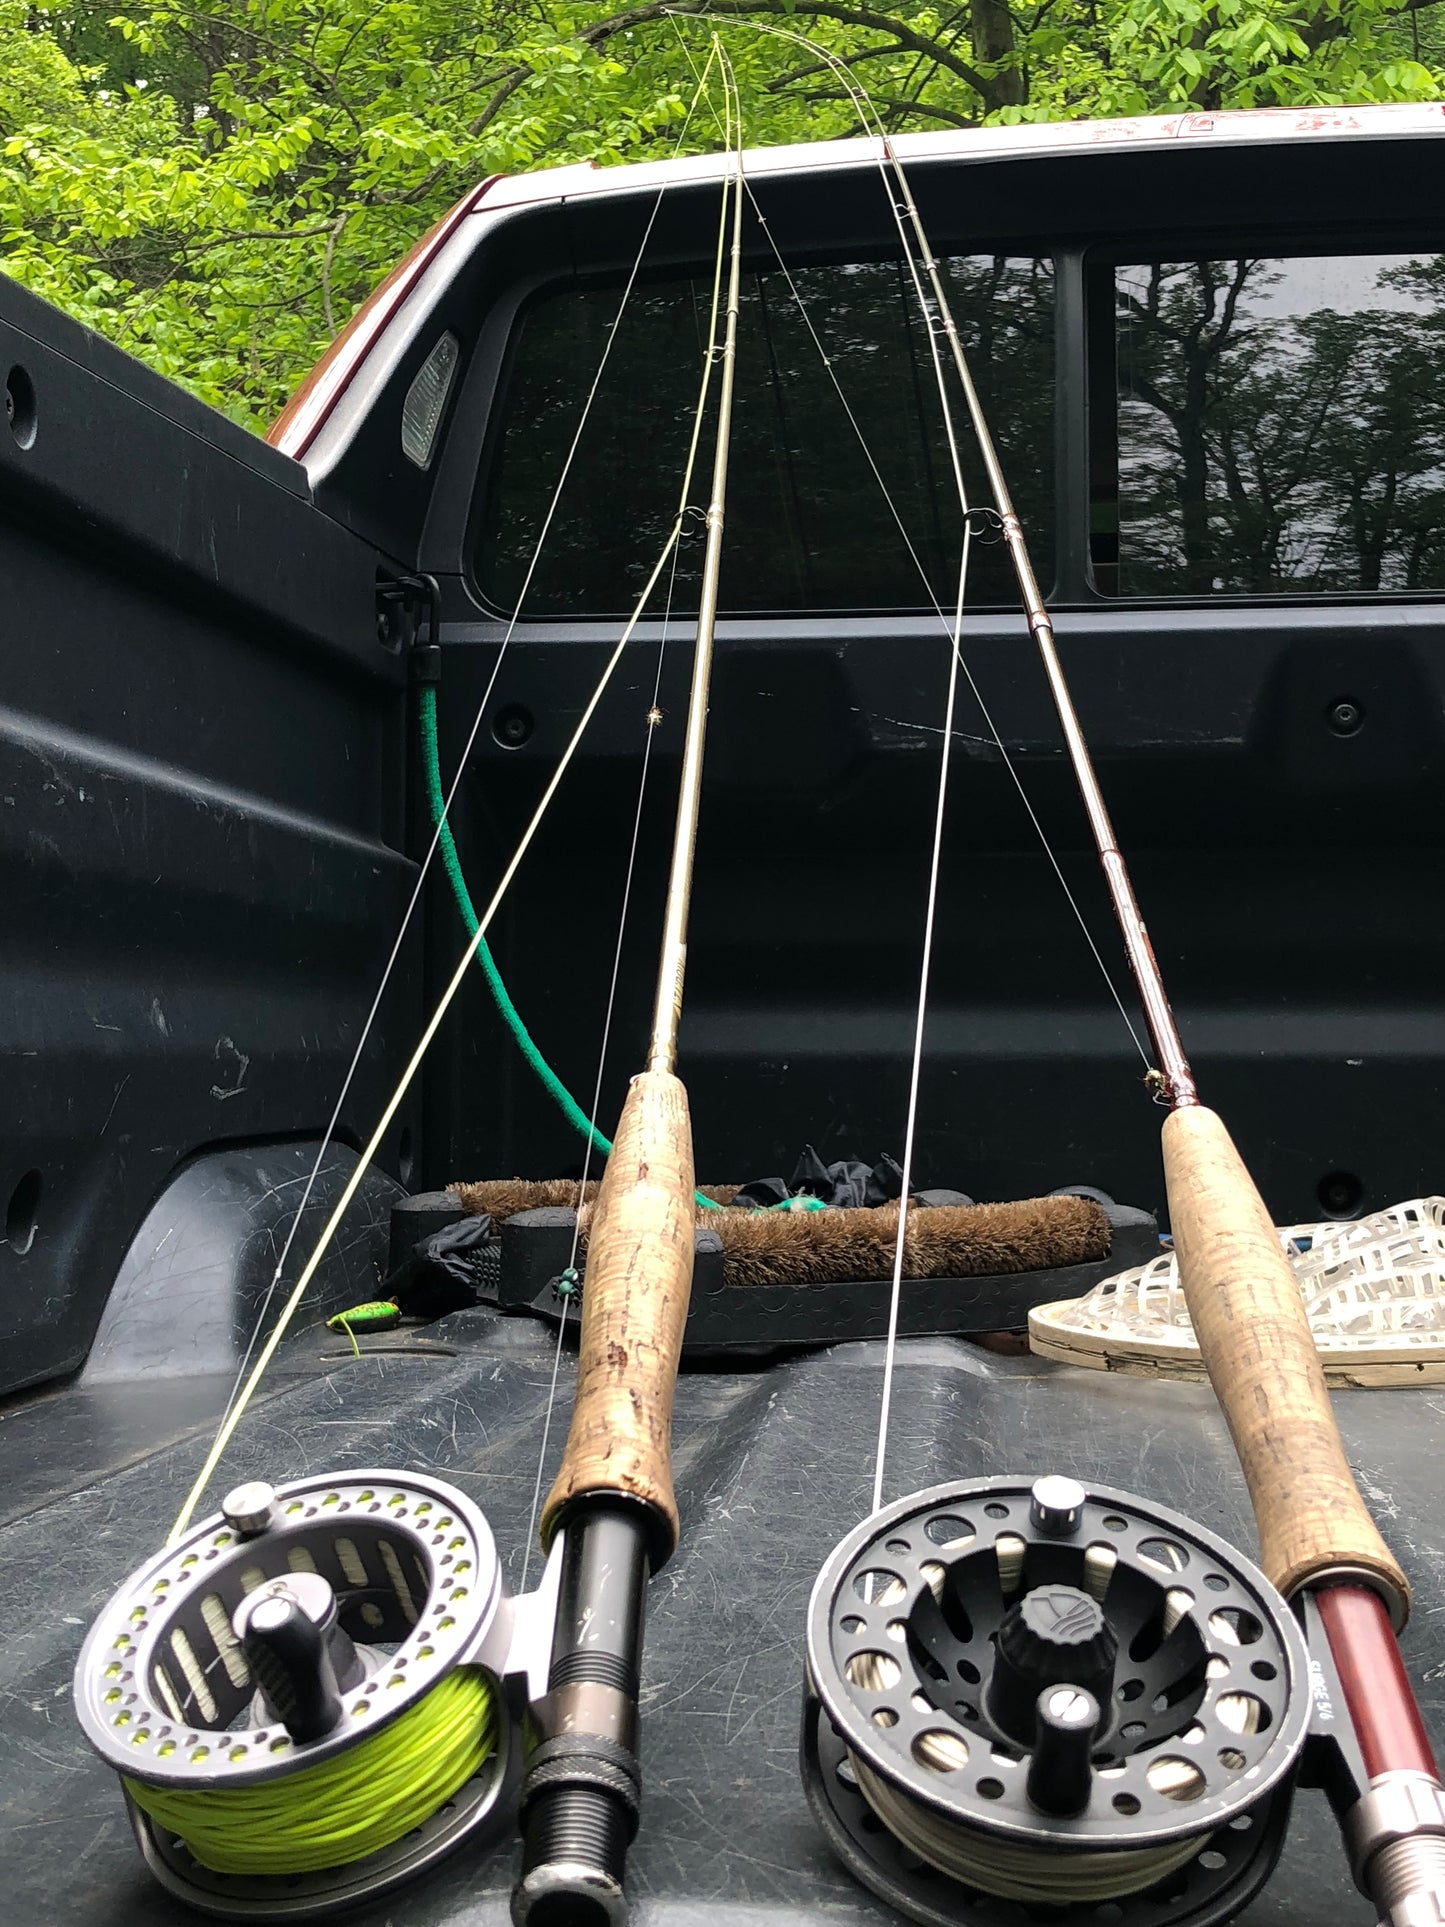 FishProCo Guide Services - Full Day Fly Fishing Trip $600